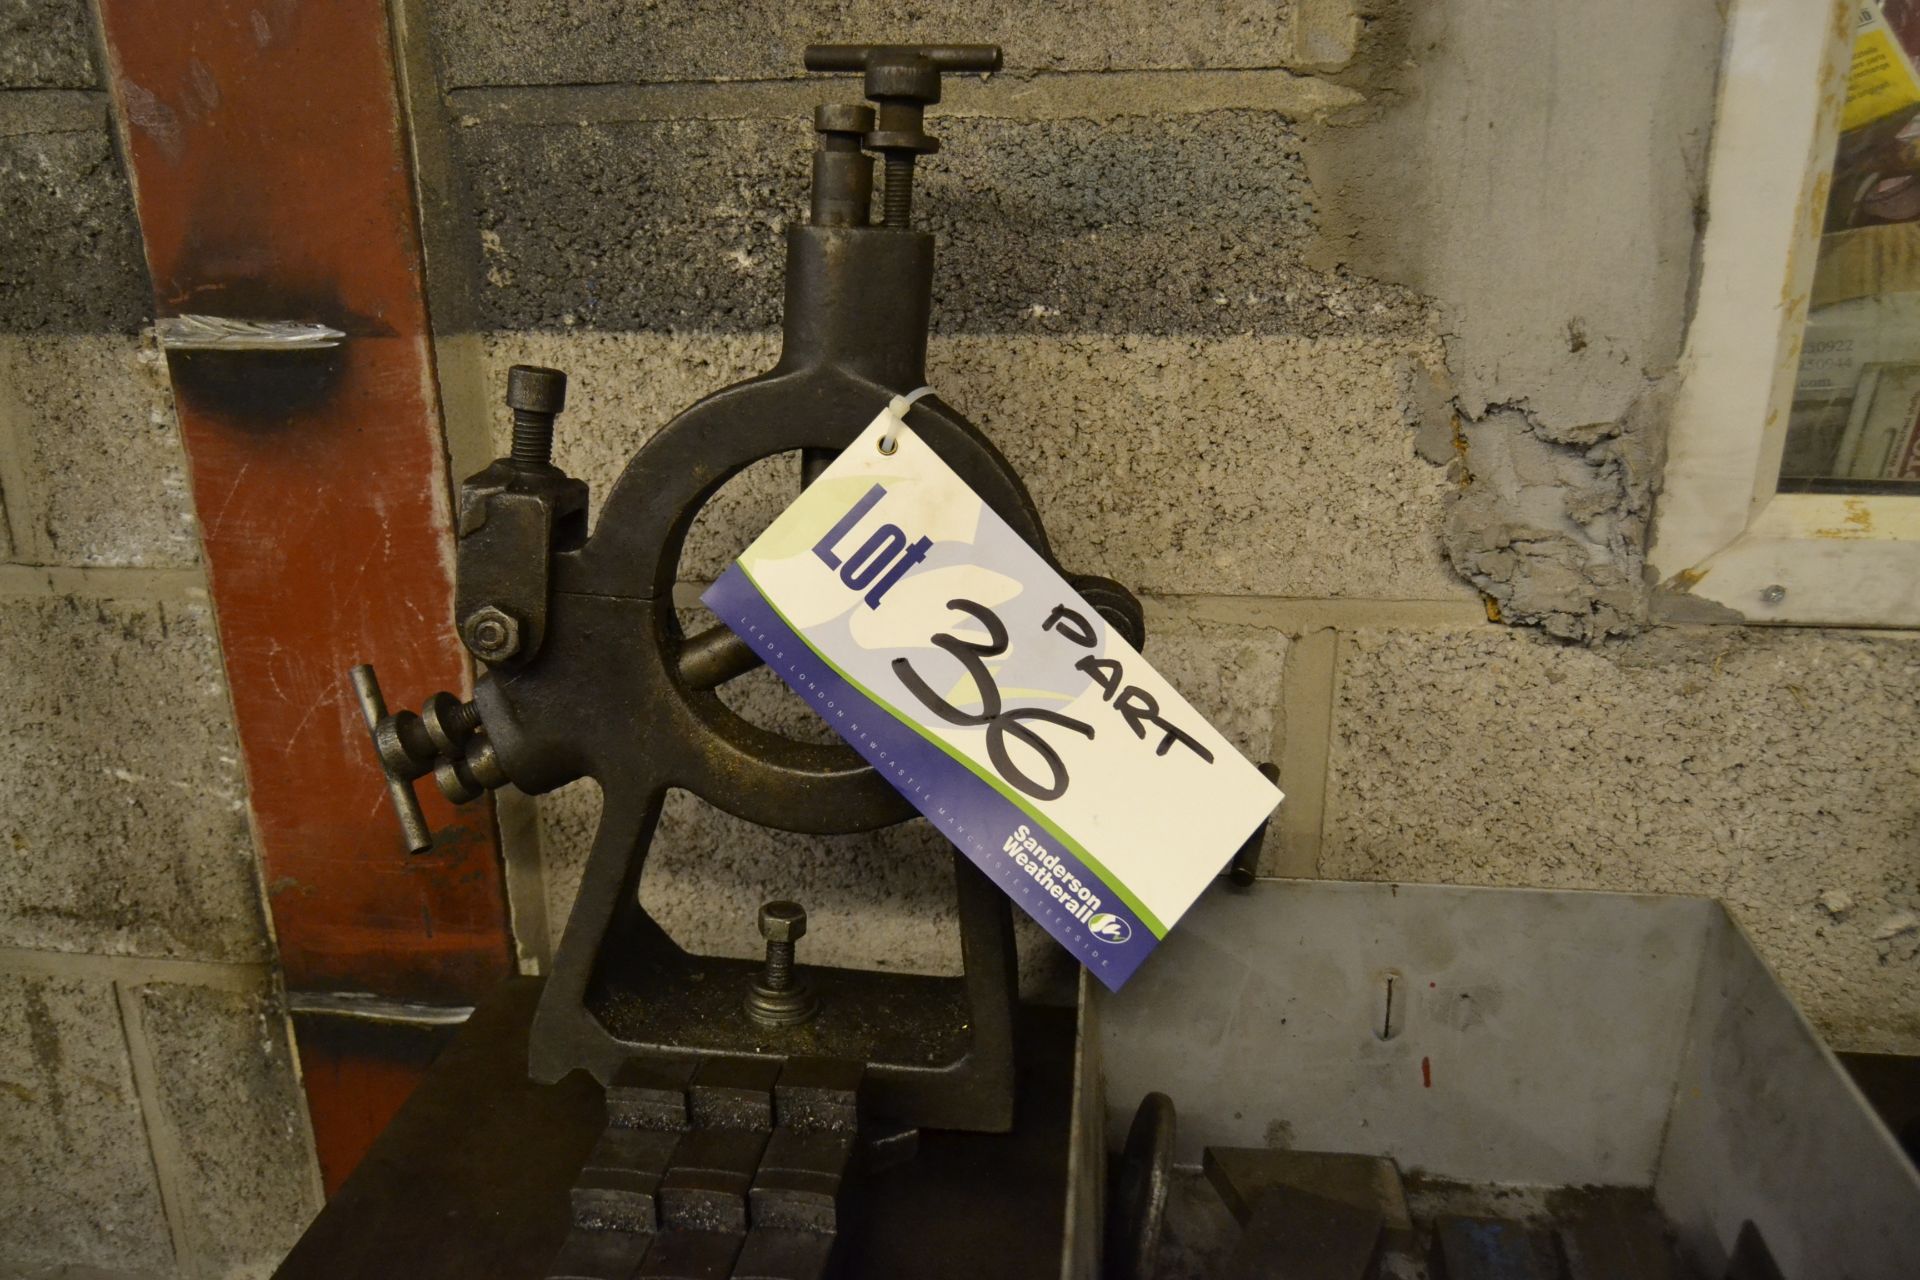 Colchester MASCOT 8½in. SLIDING SURFACING AND SCREW CUTTING GAP BED CENTRE LATHE, serial no. - Image 3 of 3